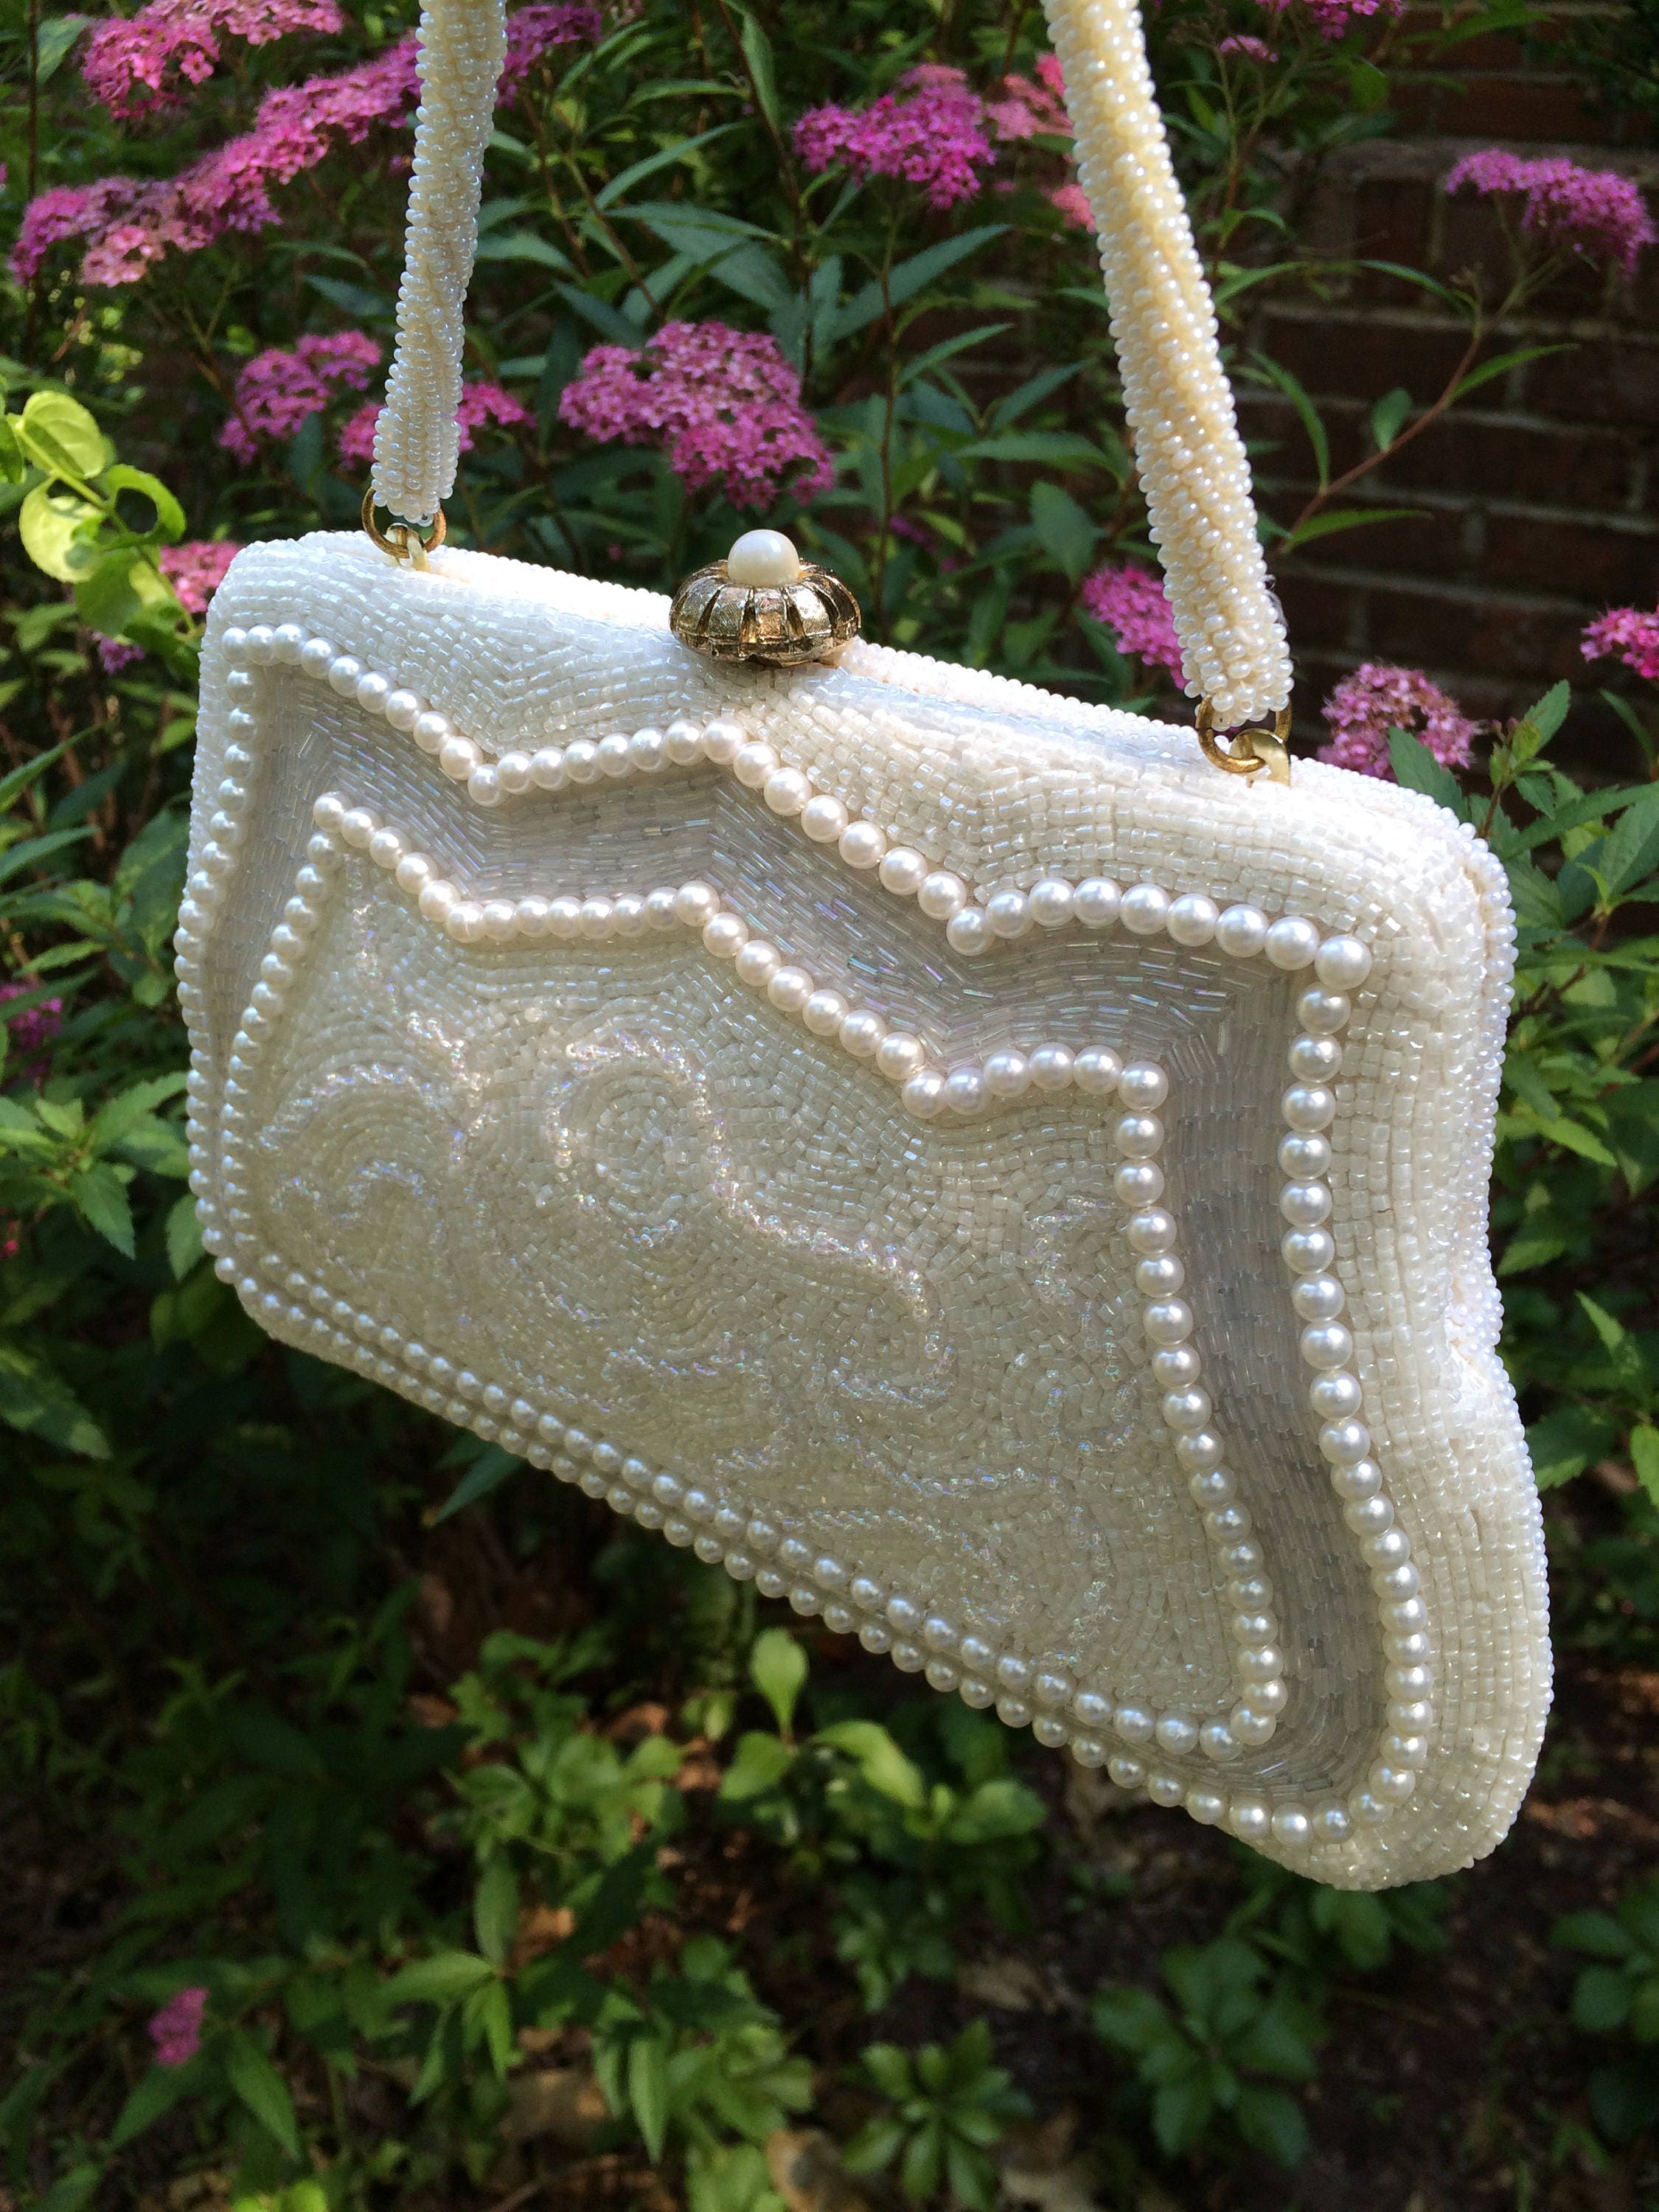 Wedding Purse Pearl Beaded Bridal Bag Made by: Vivant by | Etsy